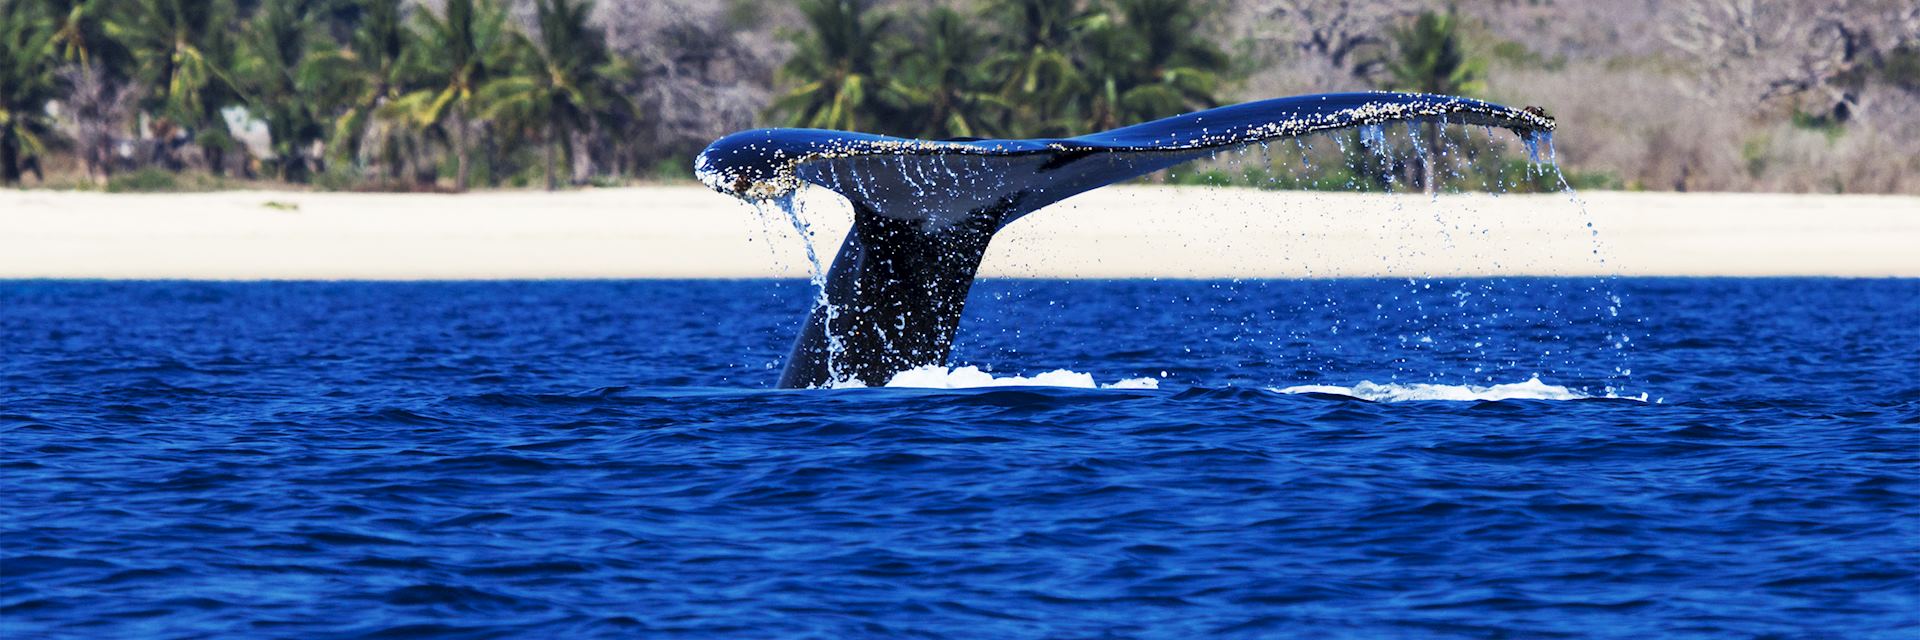 Humpback whale of the coast of Mozambique